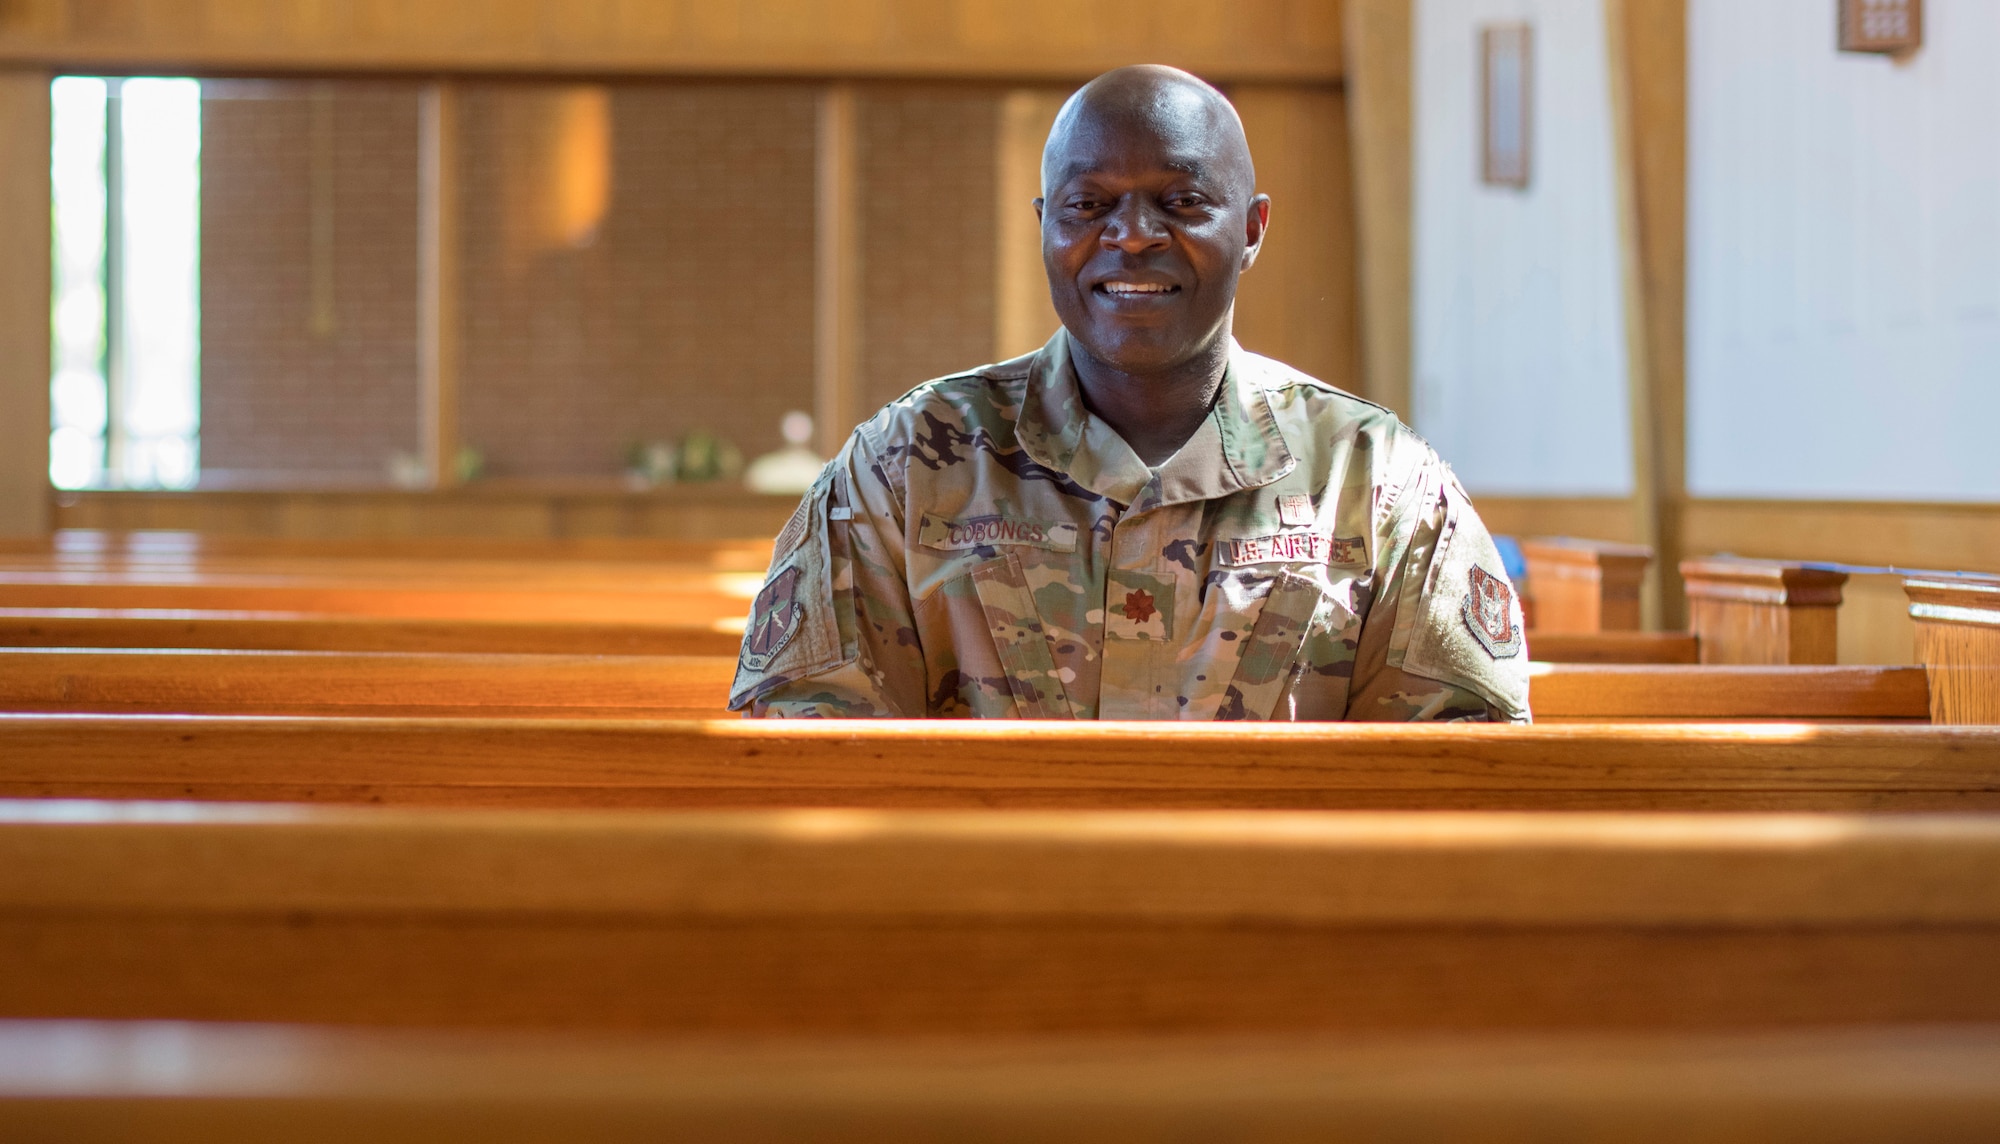 Chaplain (Maj.) Bitrus Cobongs, head chaplain for the 403rd Wing at Keesler Air Force Base, Miss., sits on a pew in Keesler's Triangle Chapel April 11, 2021. Cobongs's life began over 6,000 miles away in Nigeria where his early aspirations consisted of being a youth minister, but through closed and opened doors, he ended up serving in the U.S. military. (U.S. Air Force photo by Staff Sgt. Kristen Pittman)